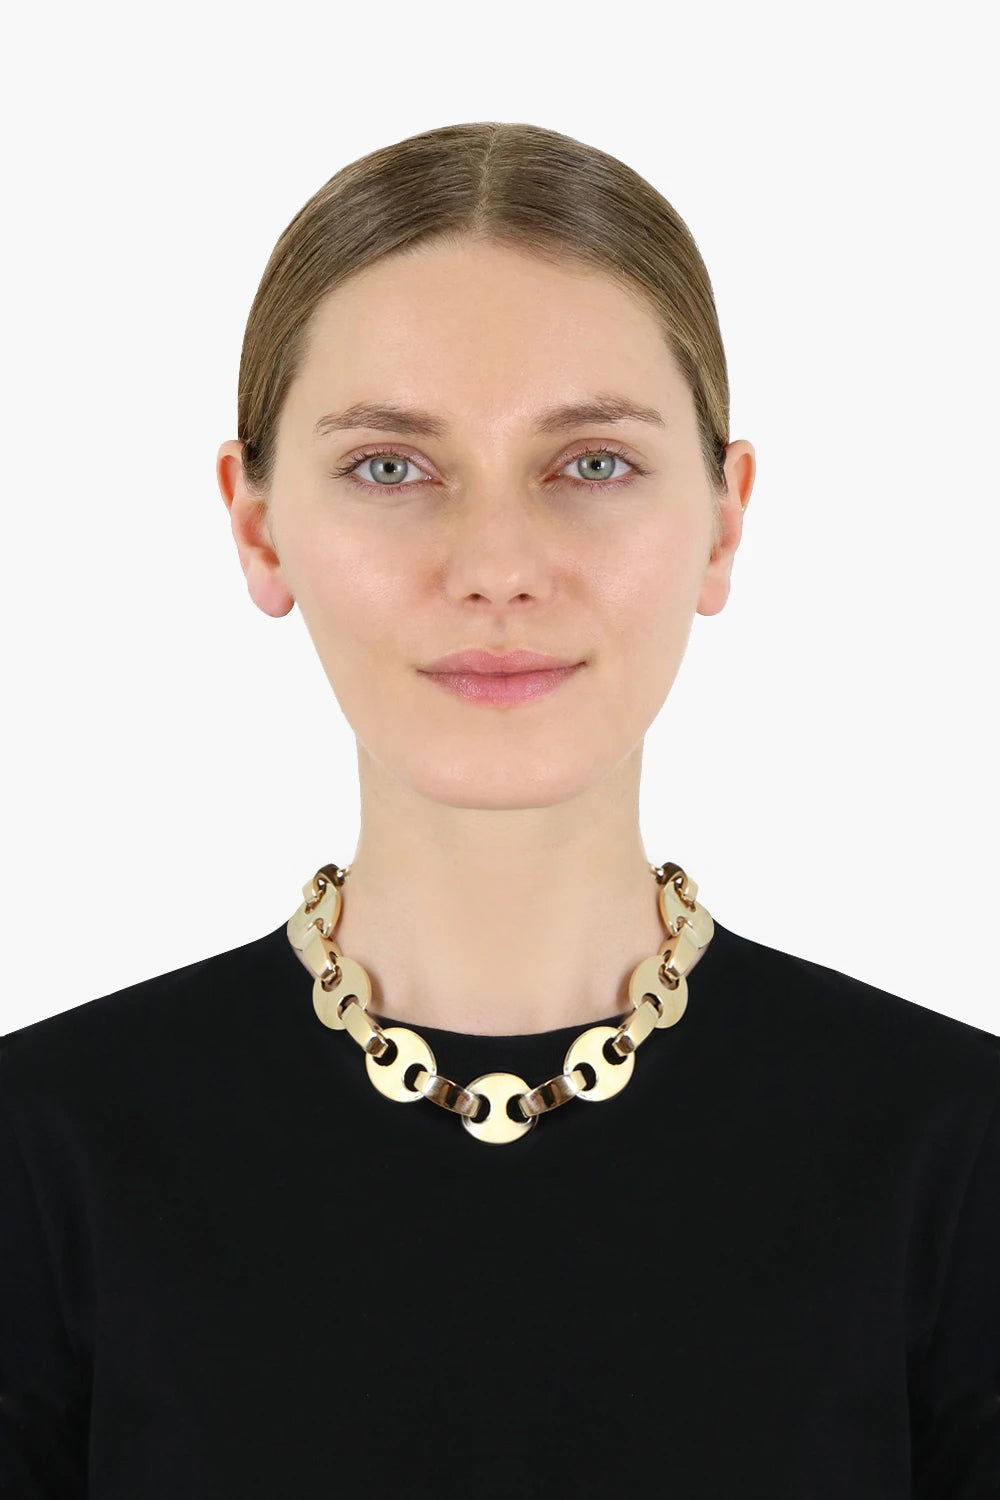 PACO RABANNE ACCESSORIES GOLD EIGHT LINK CHOKER | GOLD